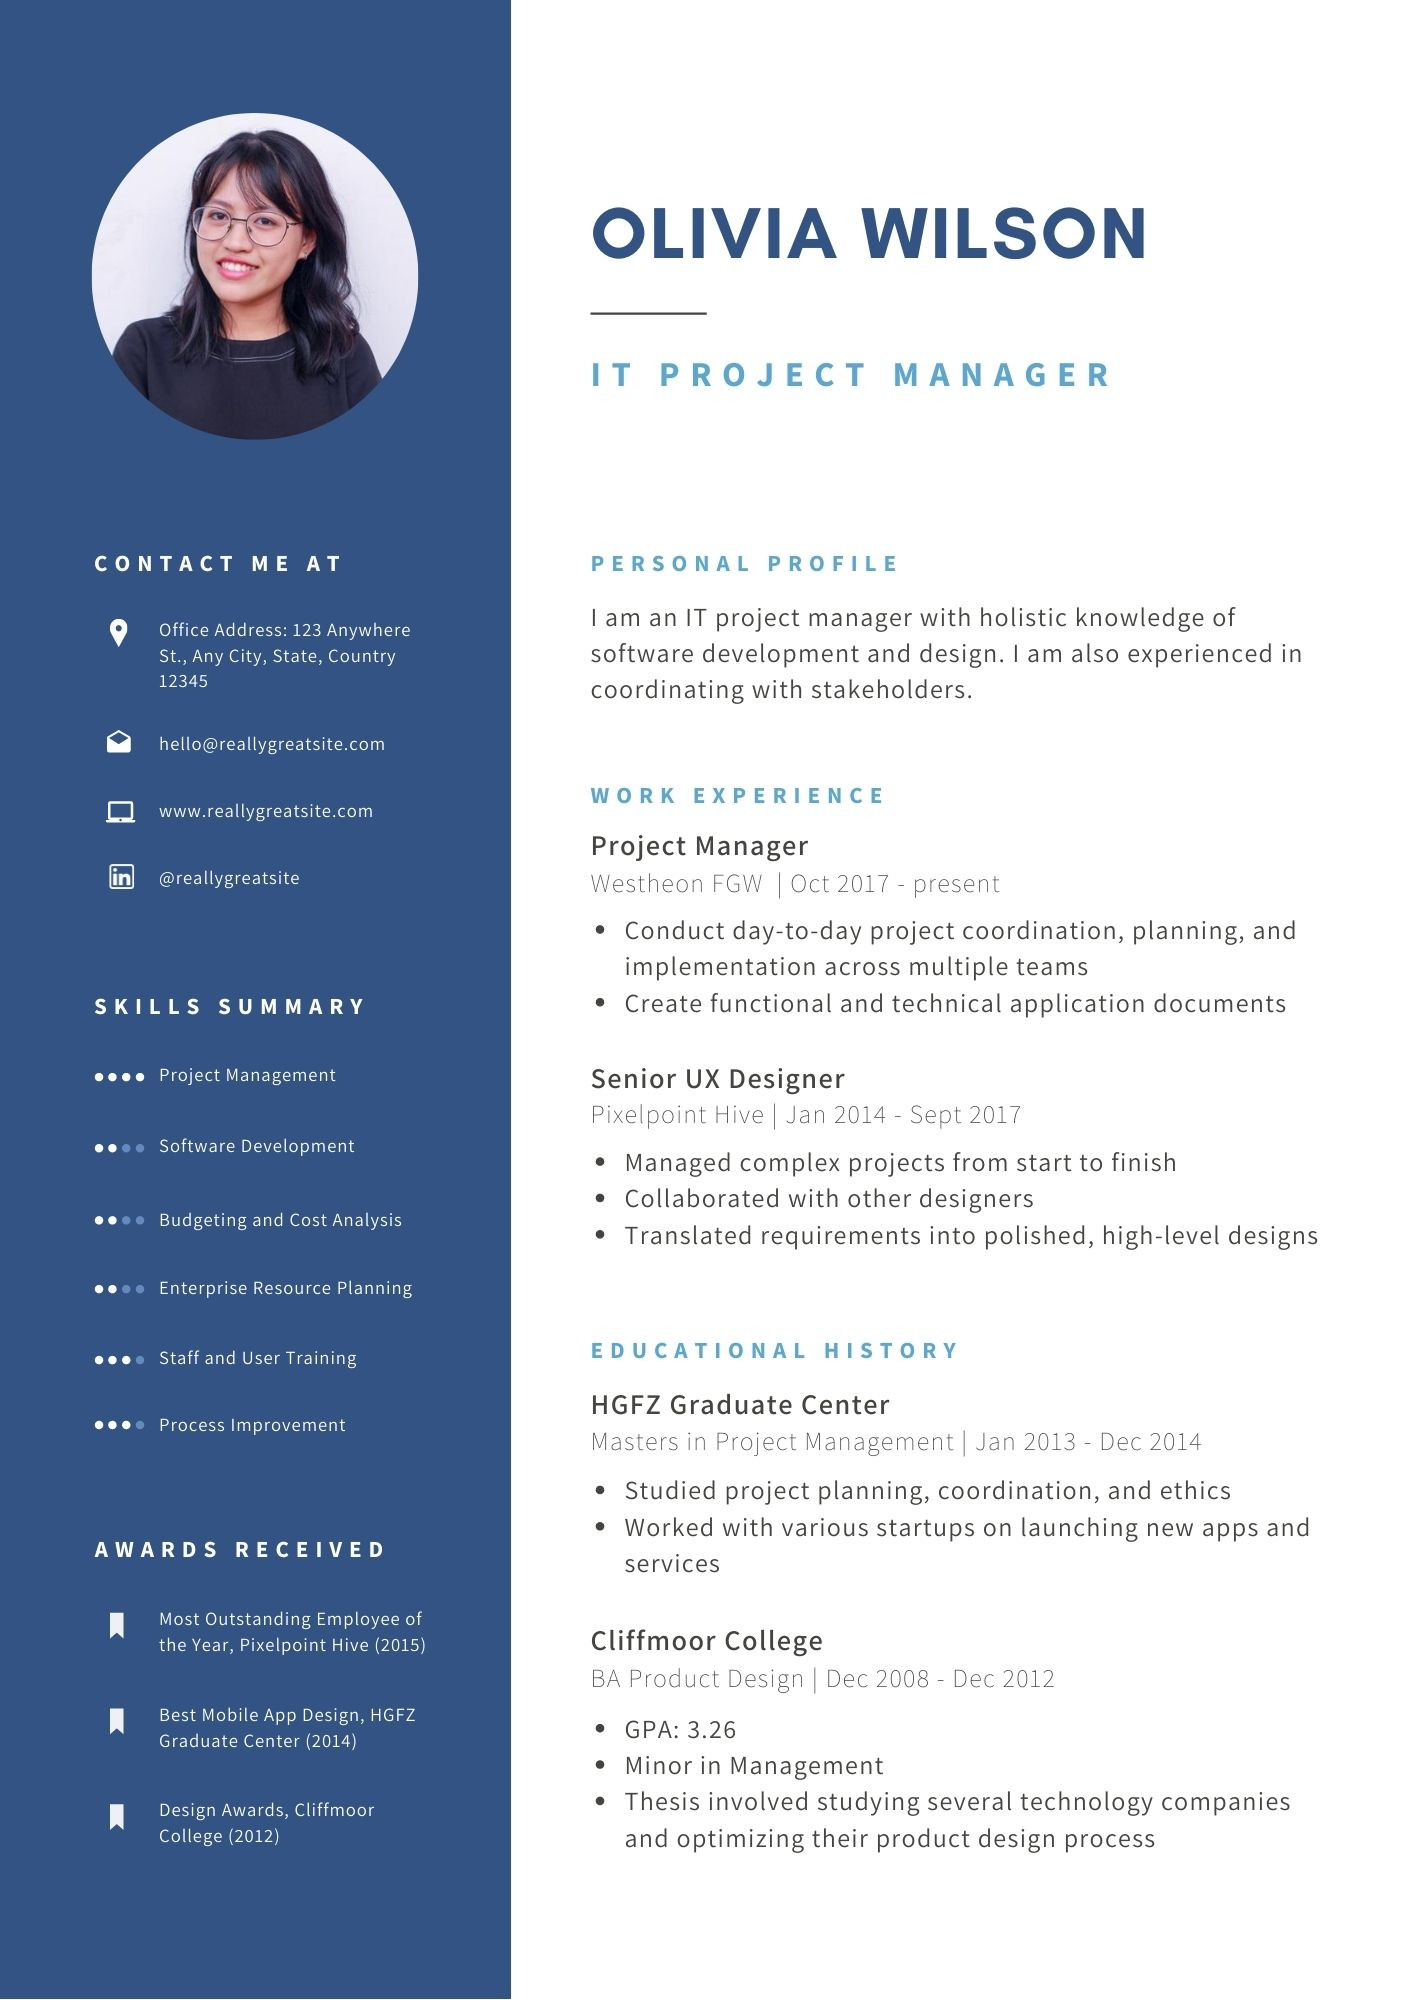 Samples Of Good Resume for Mba Students Mba Resume Samples for Creating Eye-catchy Professional Resumes …